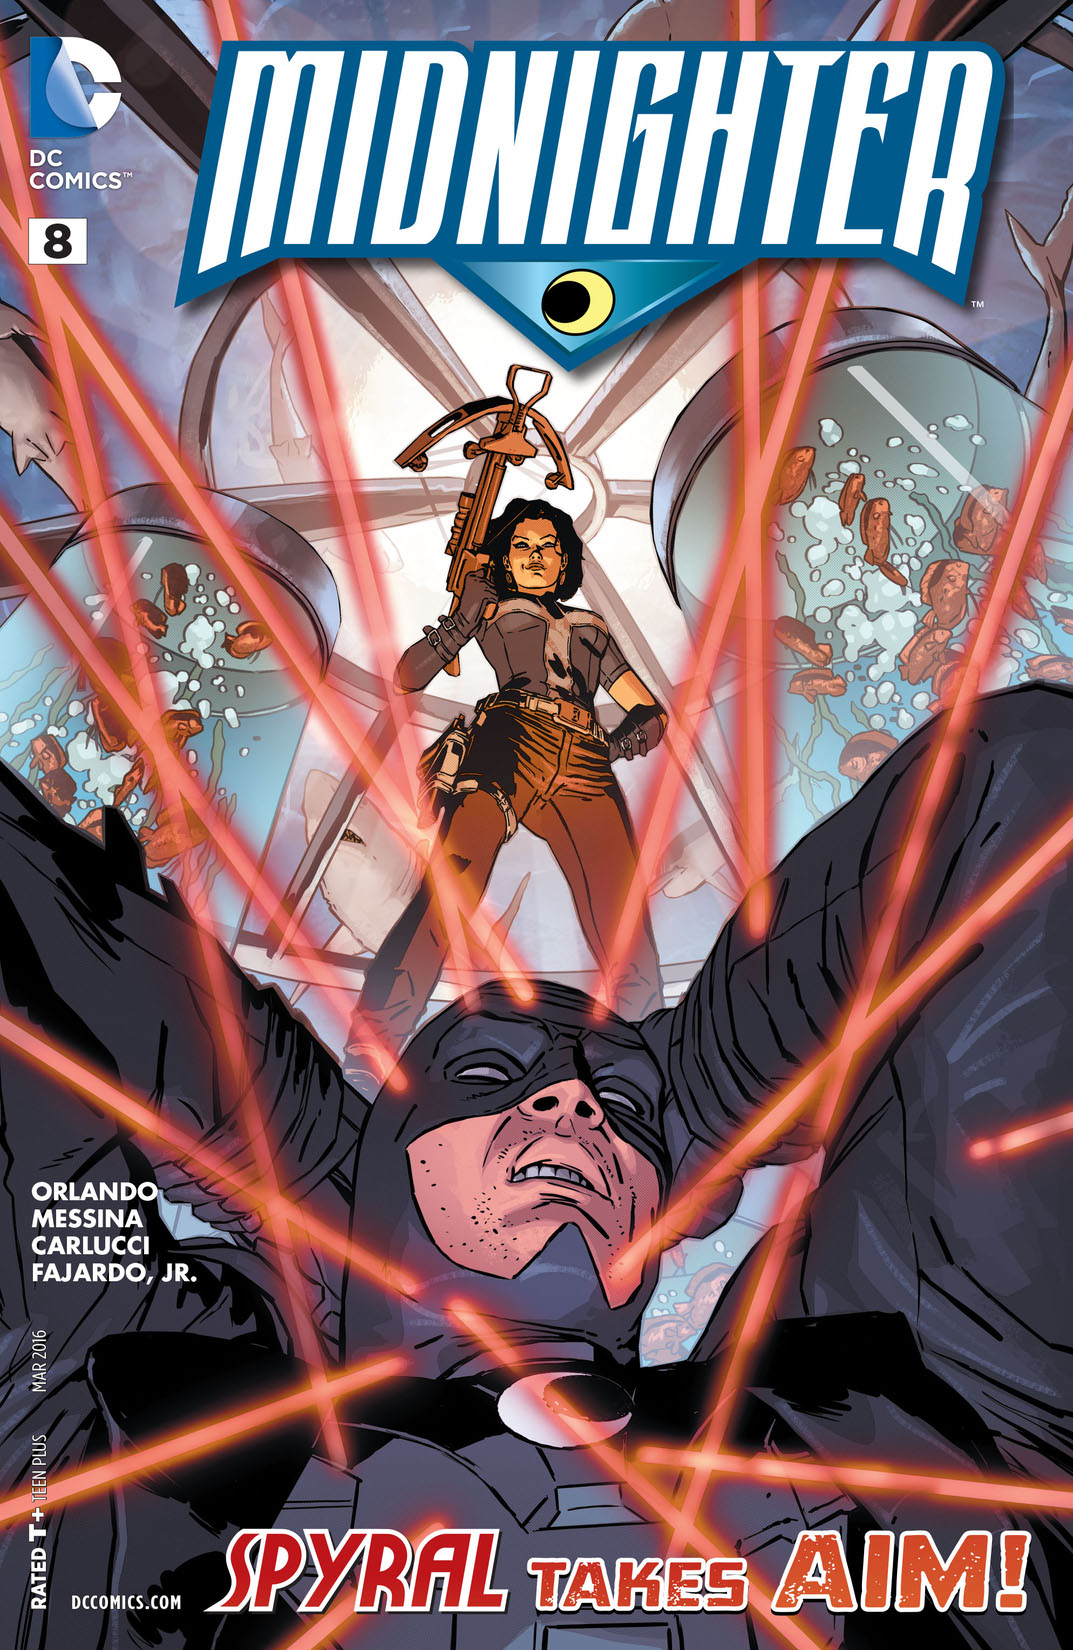 Midnighter (2015-) #8 preview images